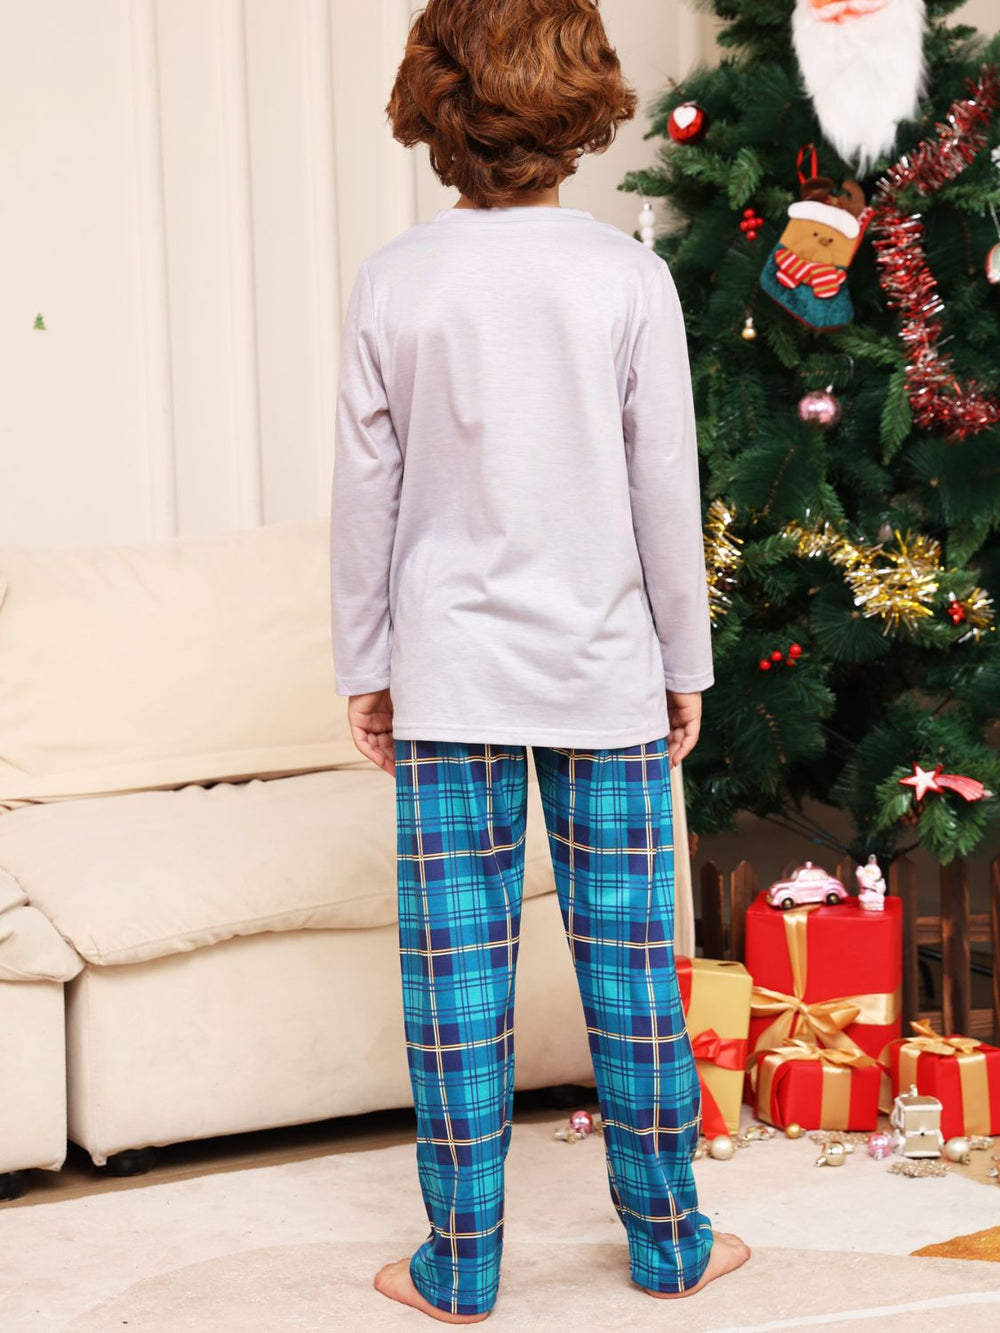 Toddler / Kids - Boys / Girls - Rudolph Graphic Long Sleeve Top and Plaid Pants Set - Sizes 2T- Kids 14